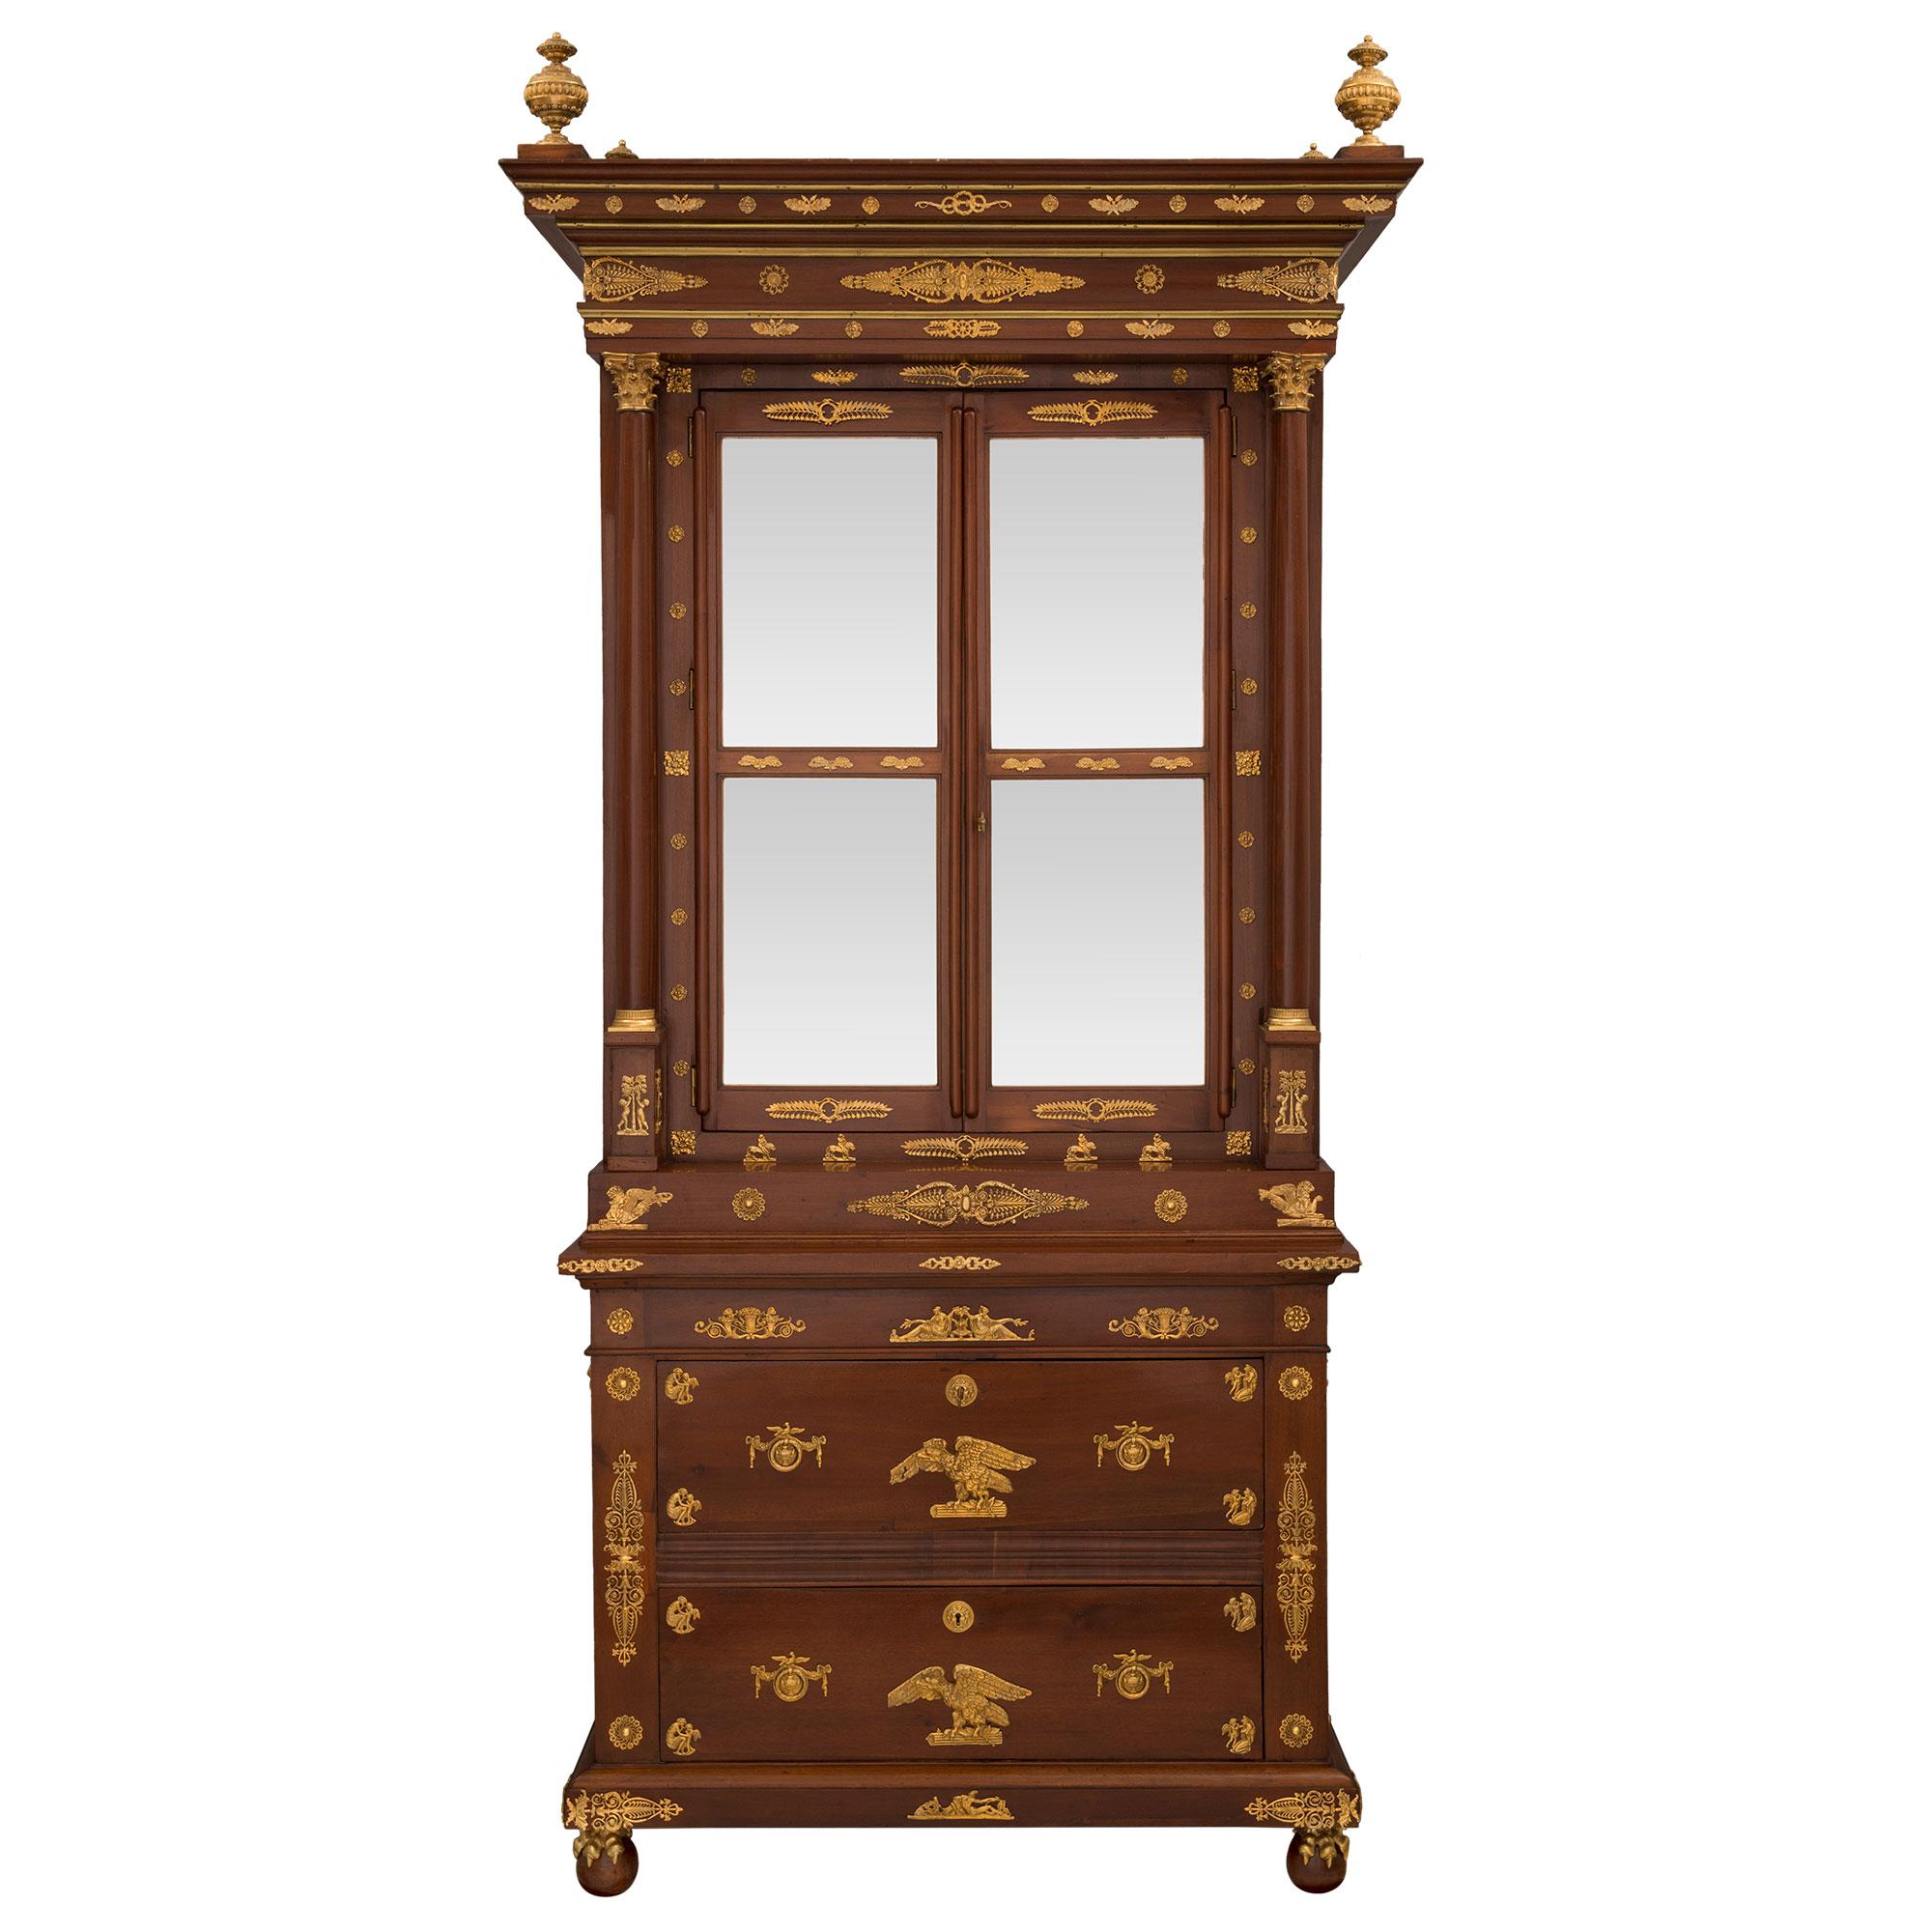 A most impressive and grand scale Russian 19th century Empire st. mahogany and ormolu Deux-Corps cabinet. The cabinet is raised by fine ball feet encased by handsome ormolu claws. Above each foot are intricately detailed pierced scrolled and